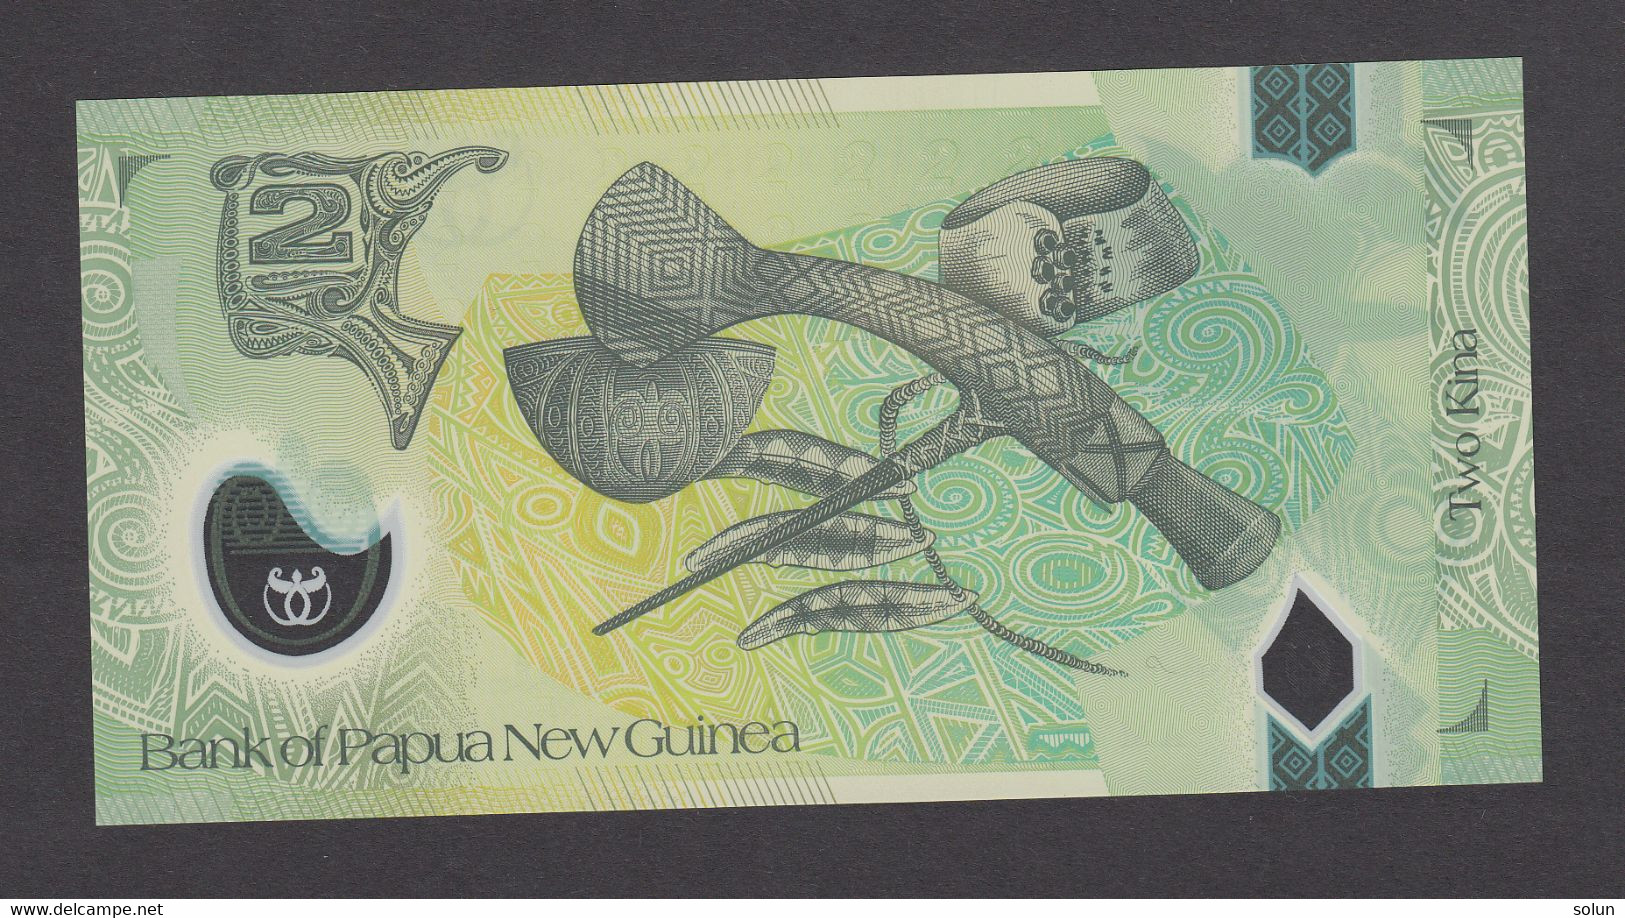 2 TWO KINA  BANK OF PAPUA NEW GUINEA BANKNOTE - Papouasie-Nouvelle-Guinée